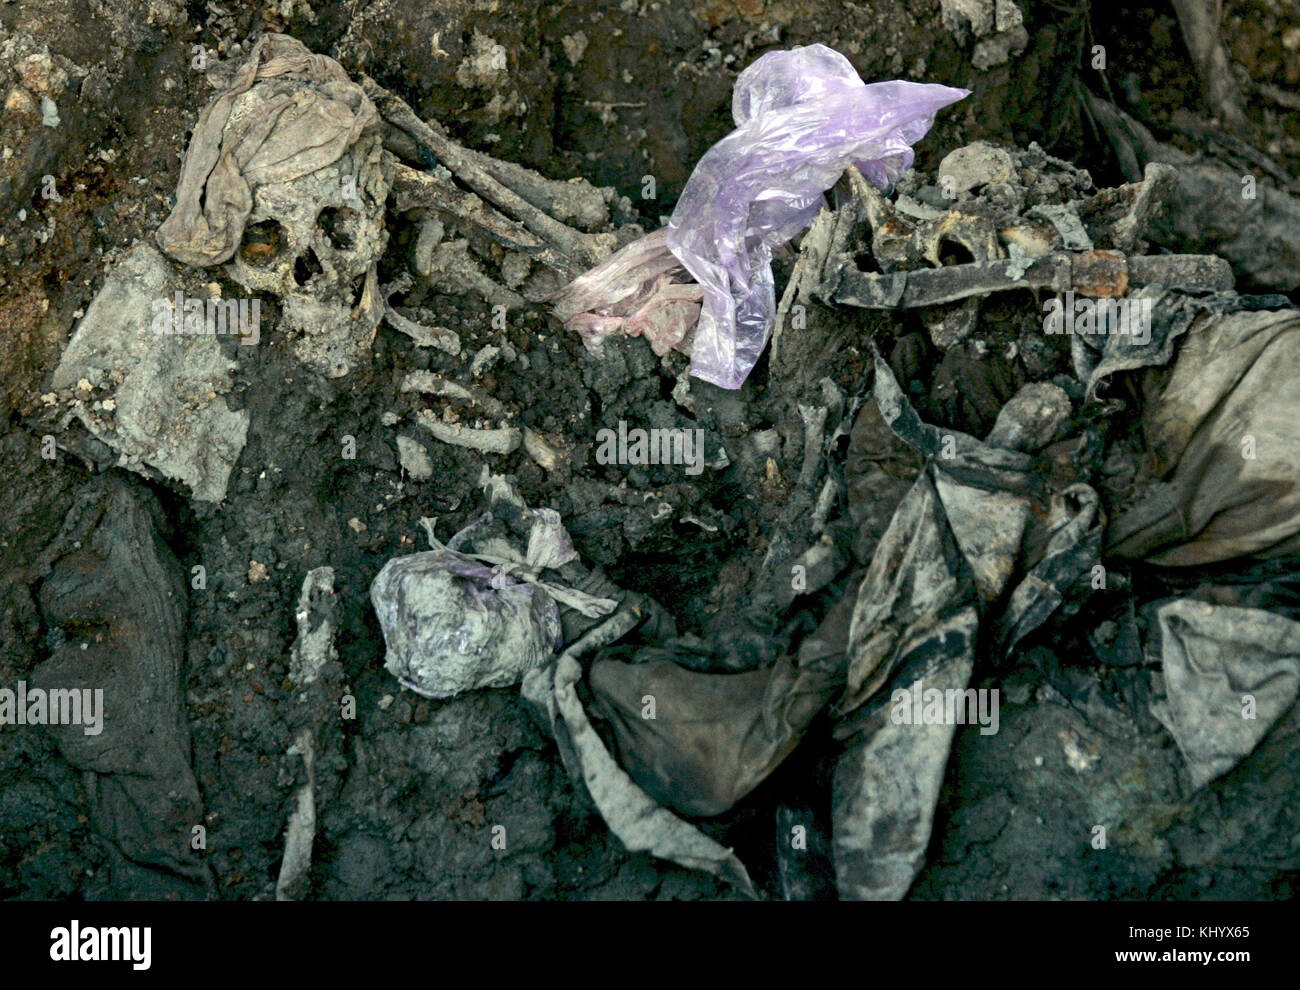 A picture shows mortal remains in a common grave in Snagovo near Zvornik, Bosnia and Herzegovina, 15 November 2006. Zvornik is located near Srebrenica at the border to Serbia. The city's number of inhabitants went down to 21,000, mostly Serbs and Serbian refugees from the Bosnian-Croatian Federation. The city set the sad scene for the massacre in July 1995, when Bosnian Serbs under the commando of General Ratko Mladic invaded the city and slaughtered all male persons they could get hold of under the eyes of Dutch UN troops. Photo: Matthias Schrader | usage worldwide Stock Photo